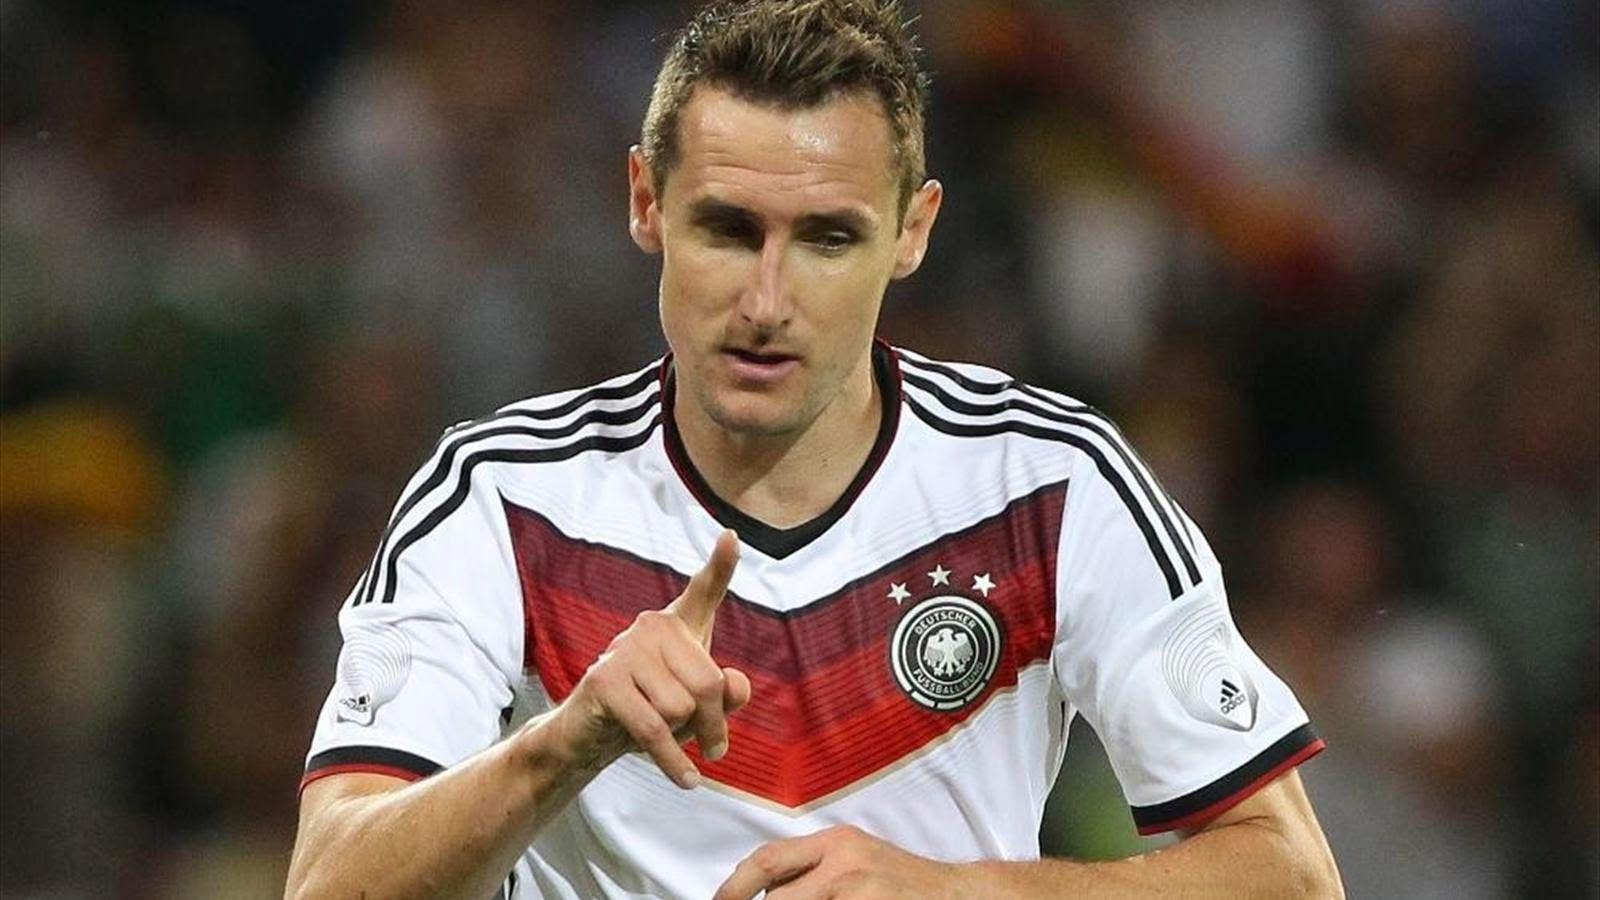 Less Know Facts About Miroslav Klose